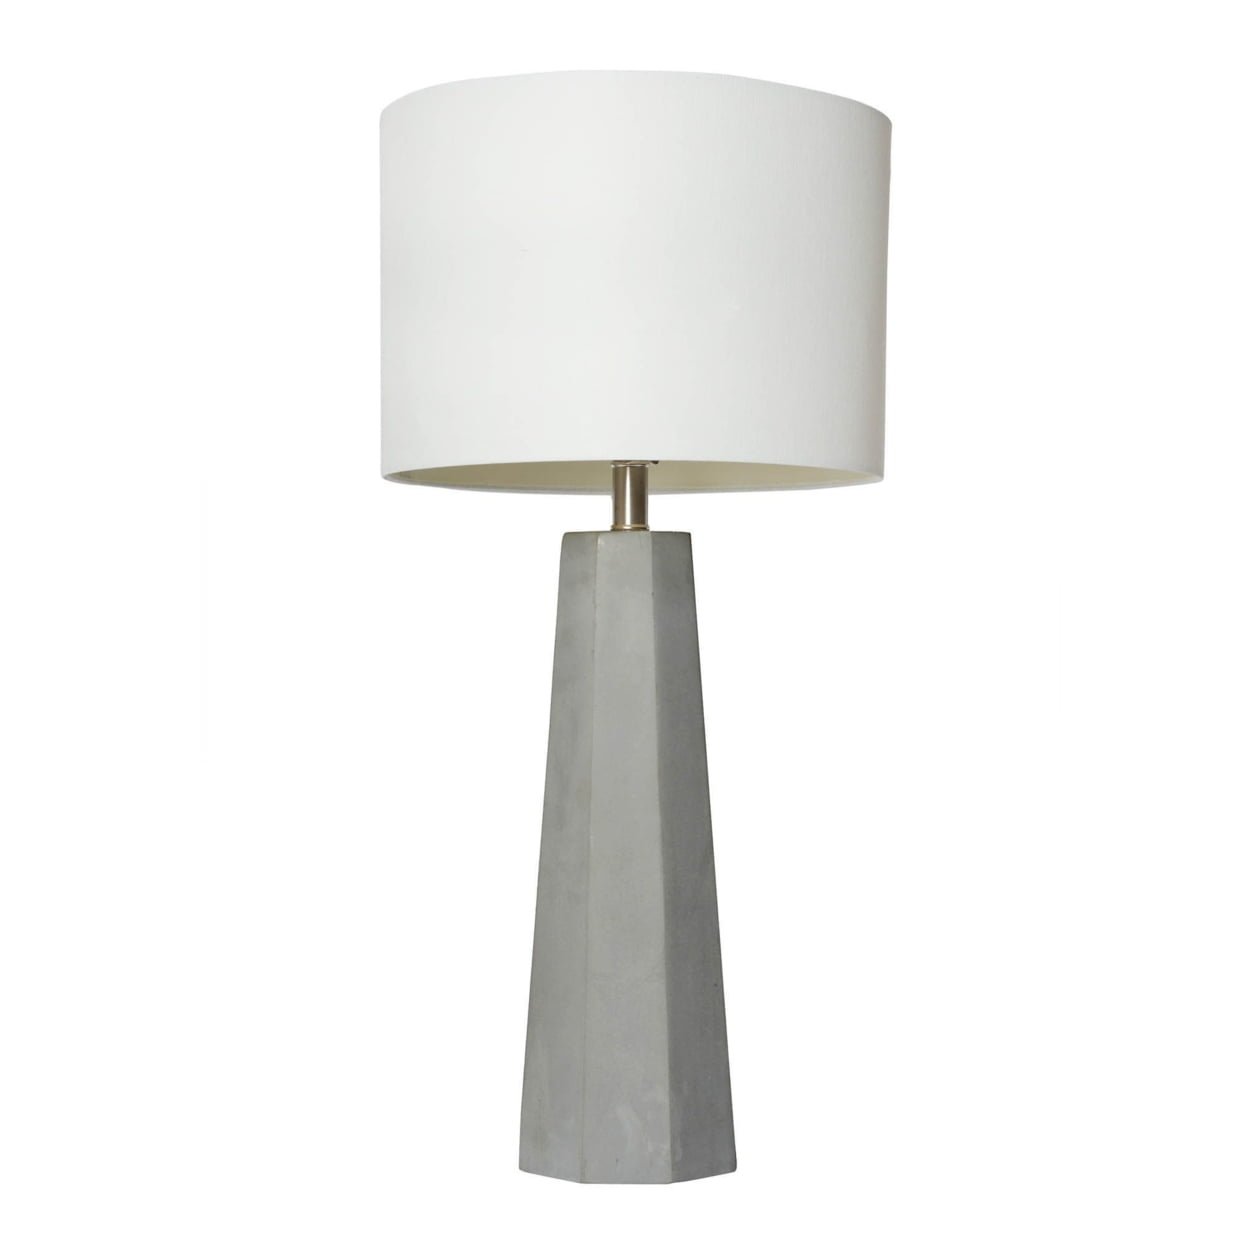 Picture of Elegant Designs Concrete Table Lamp with Fabric Shade